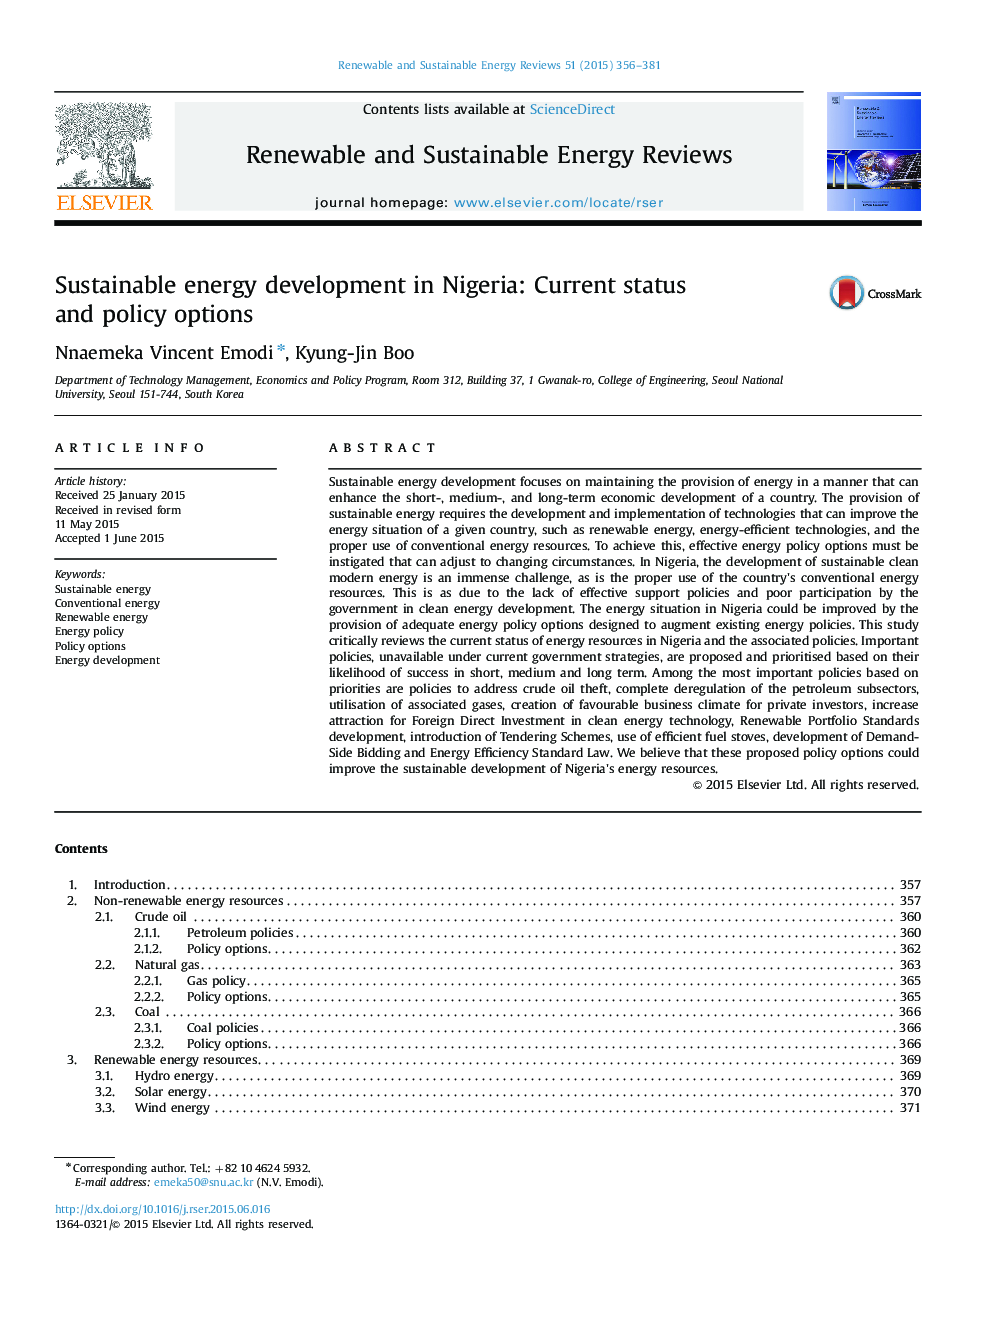 Sustainable energy development in Nigeria: Current status and policy options